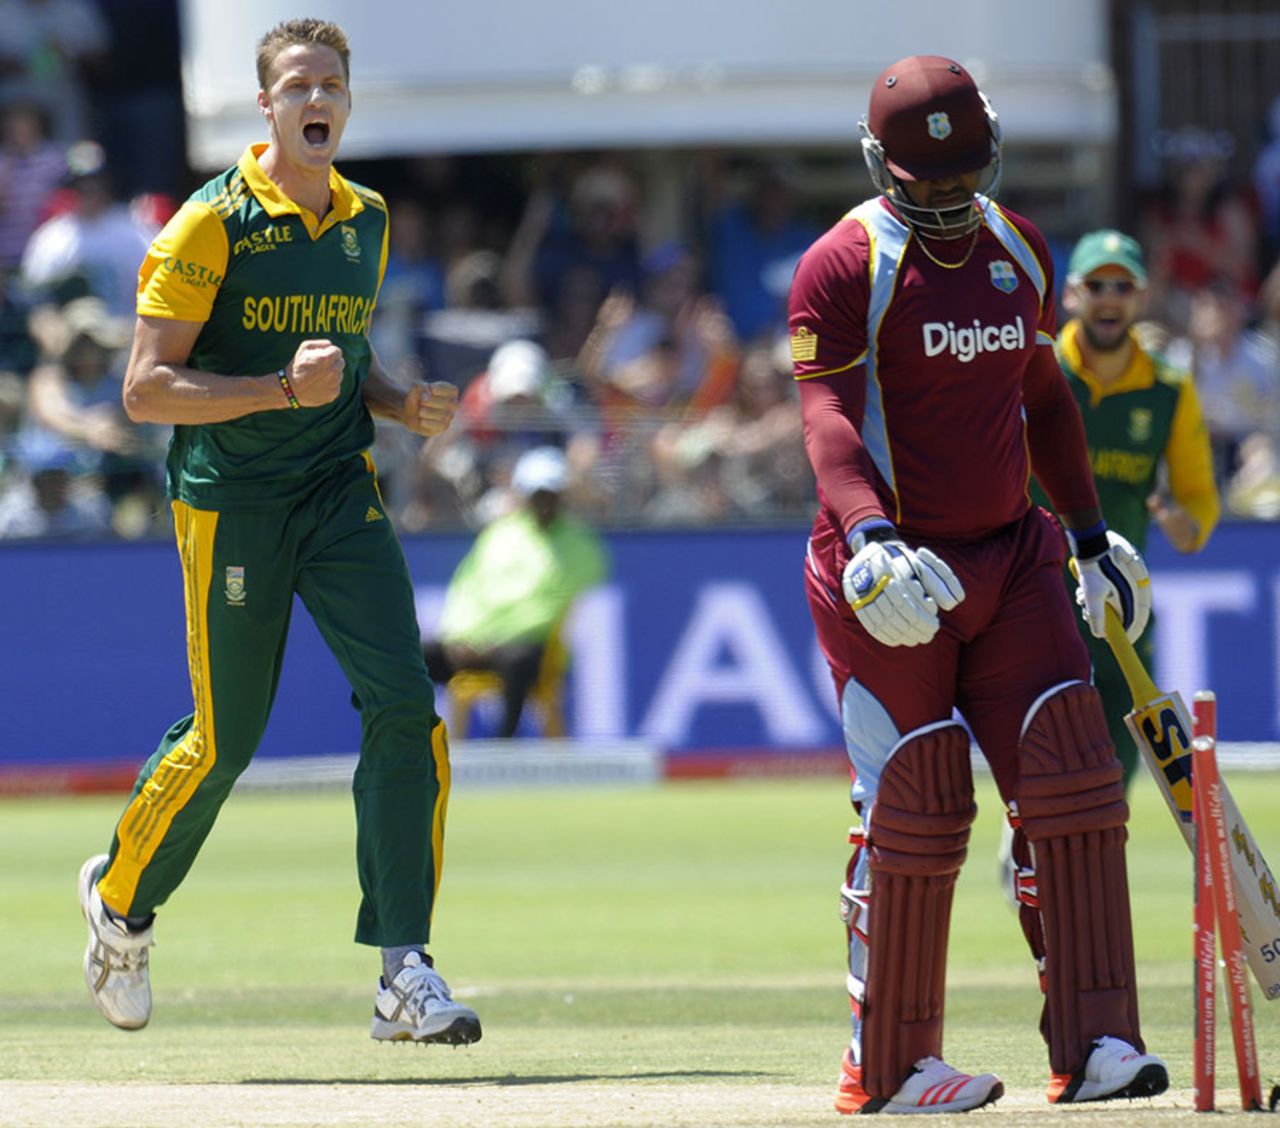 Morne Morkel cleaned up Dwayne Smith to the third ball of the innings, South Africa v West Indies, 4th ODI, Port Elizabeth, January 25, 2015